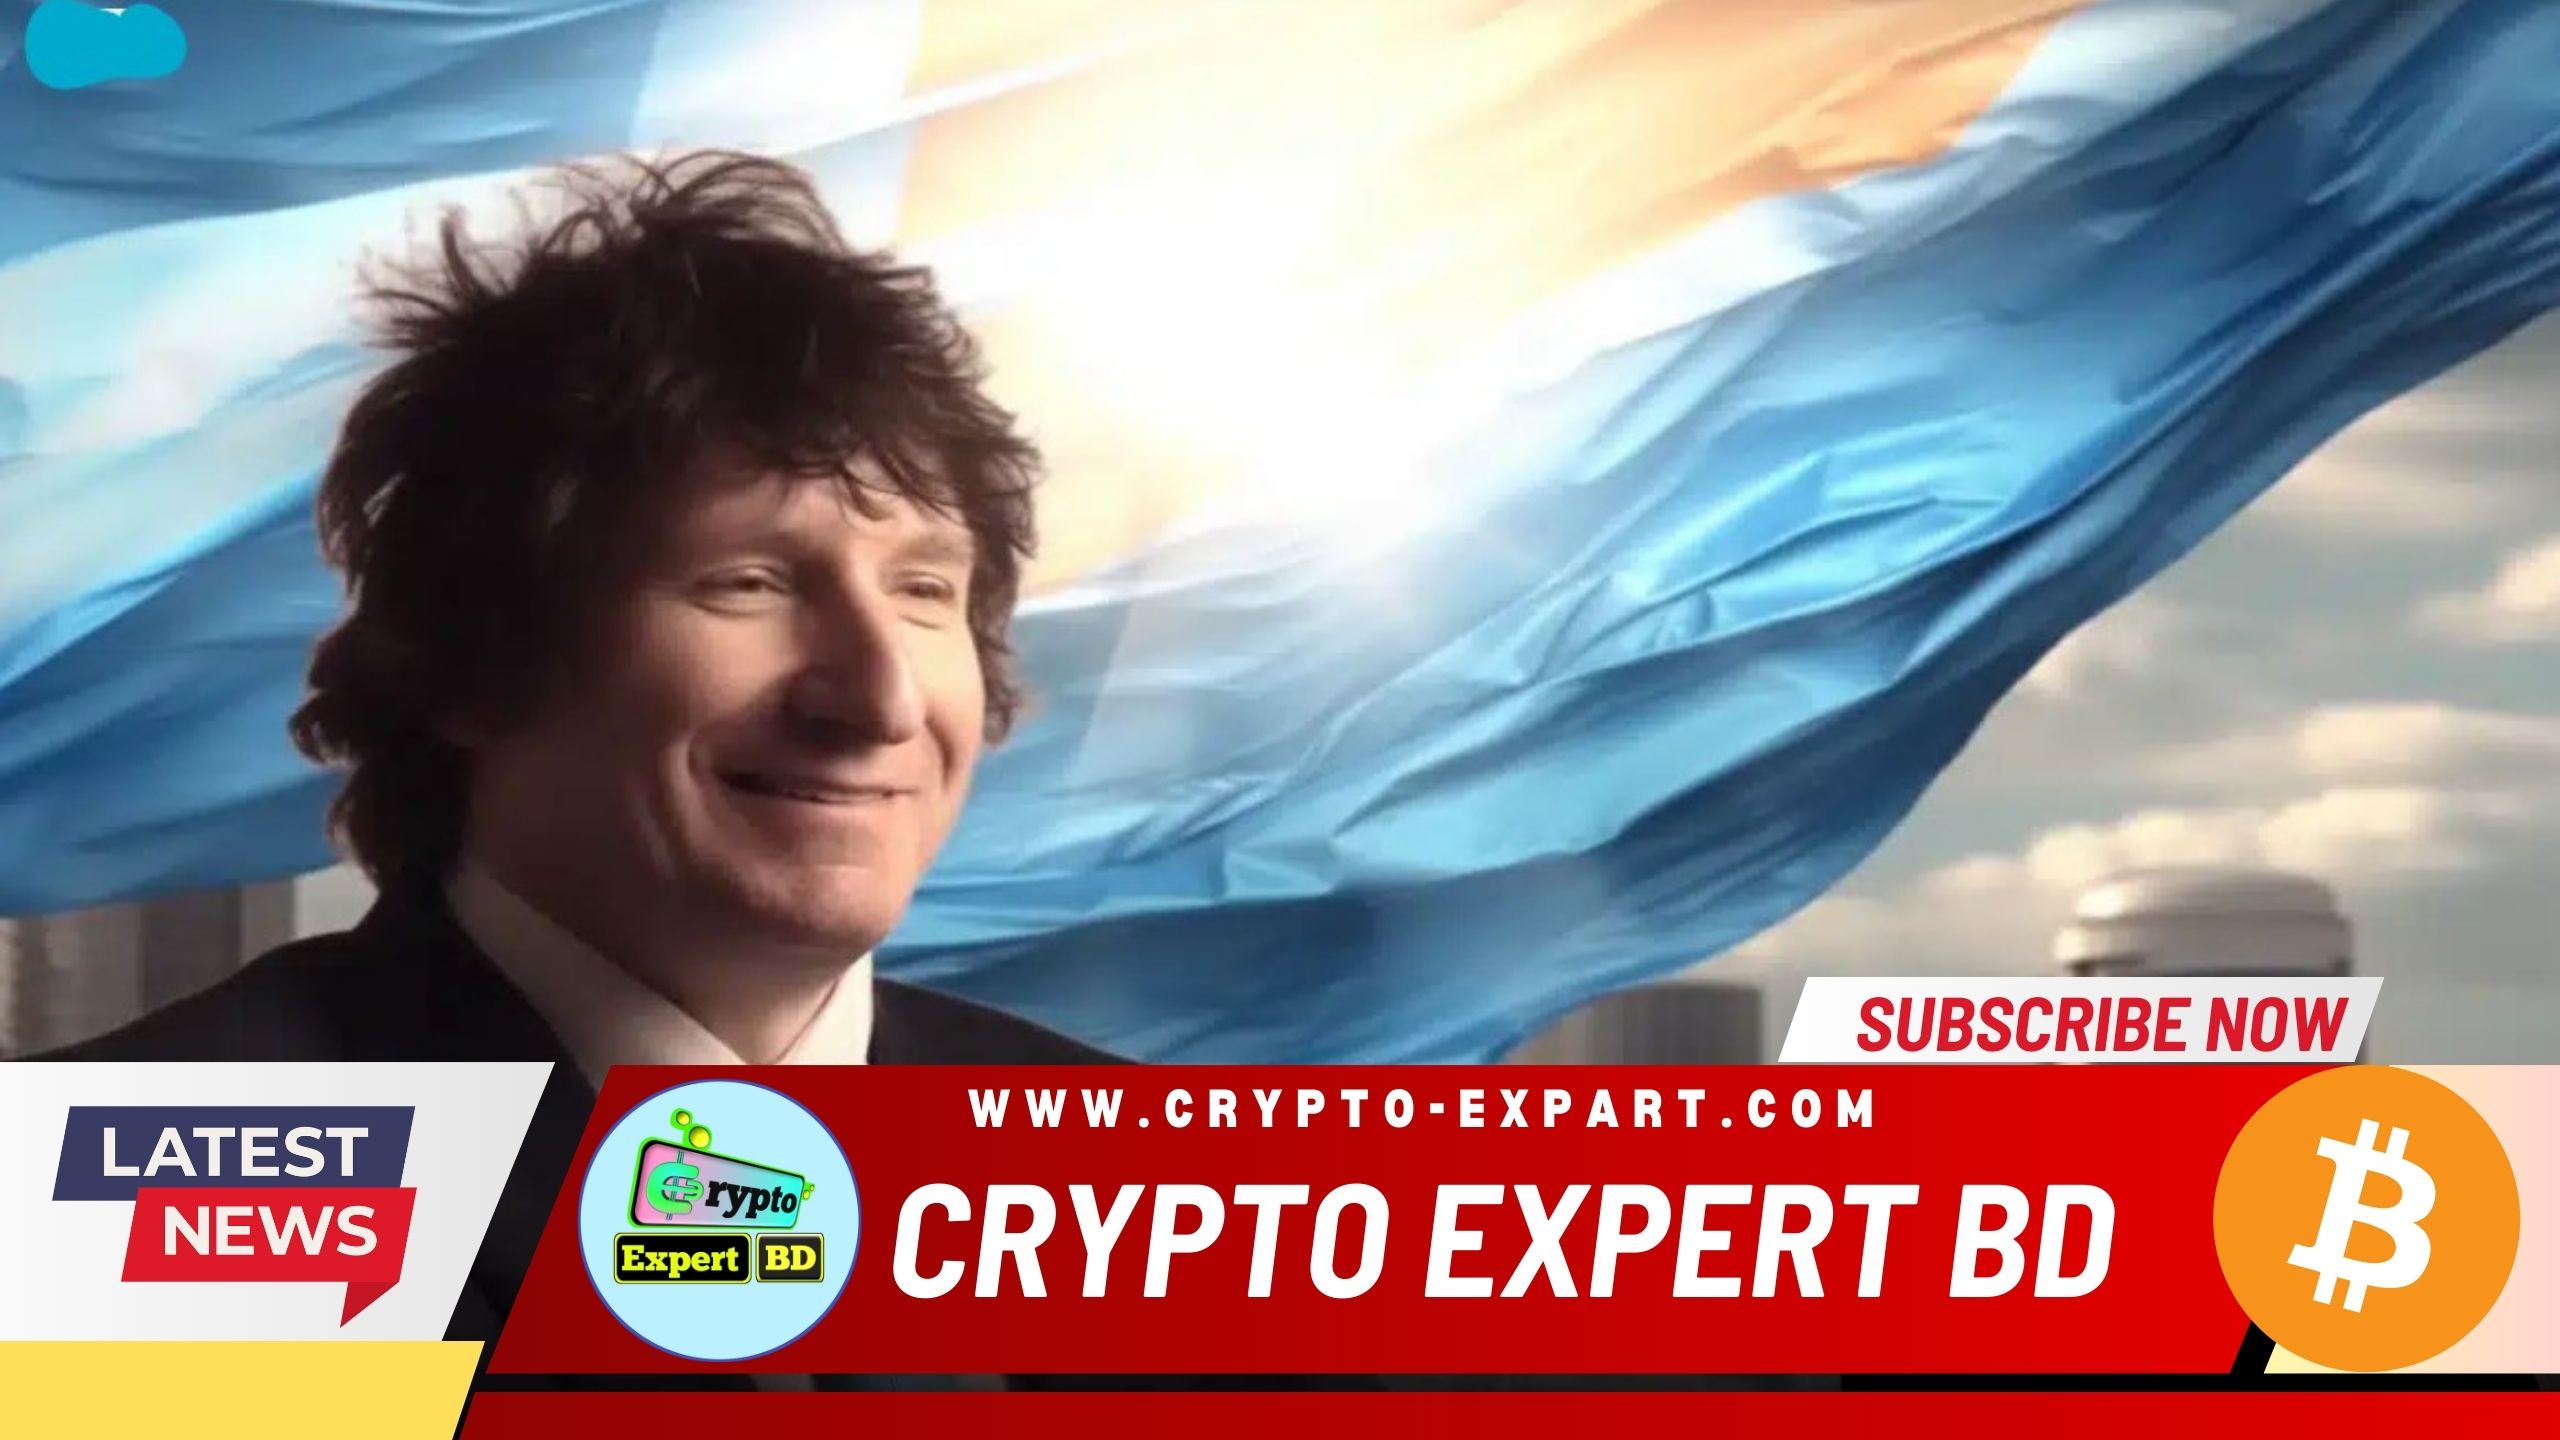 Argentina Legalizes Bitcoin in Contracts, Local BTC Price Hits Record High